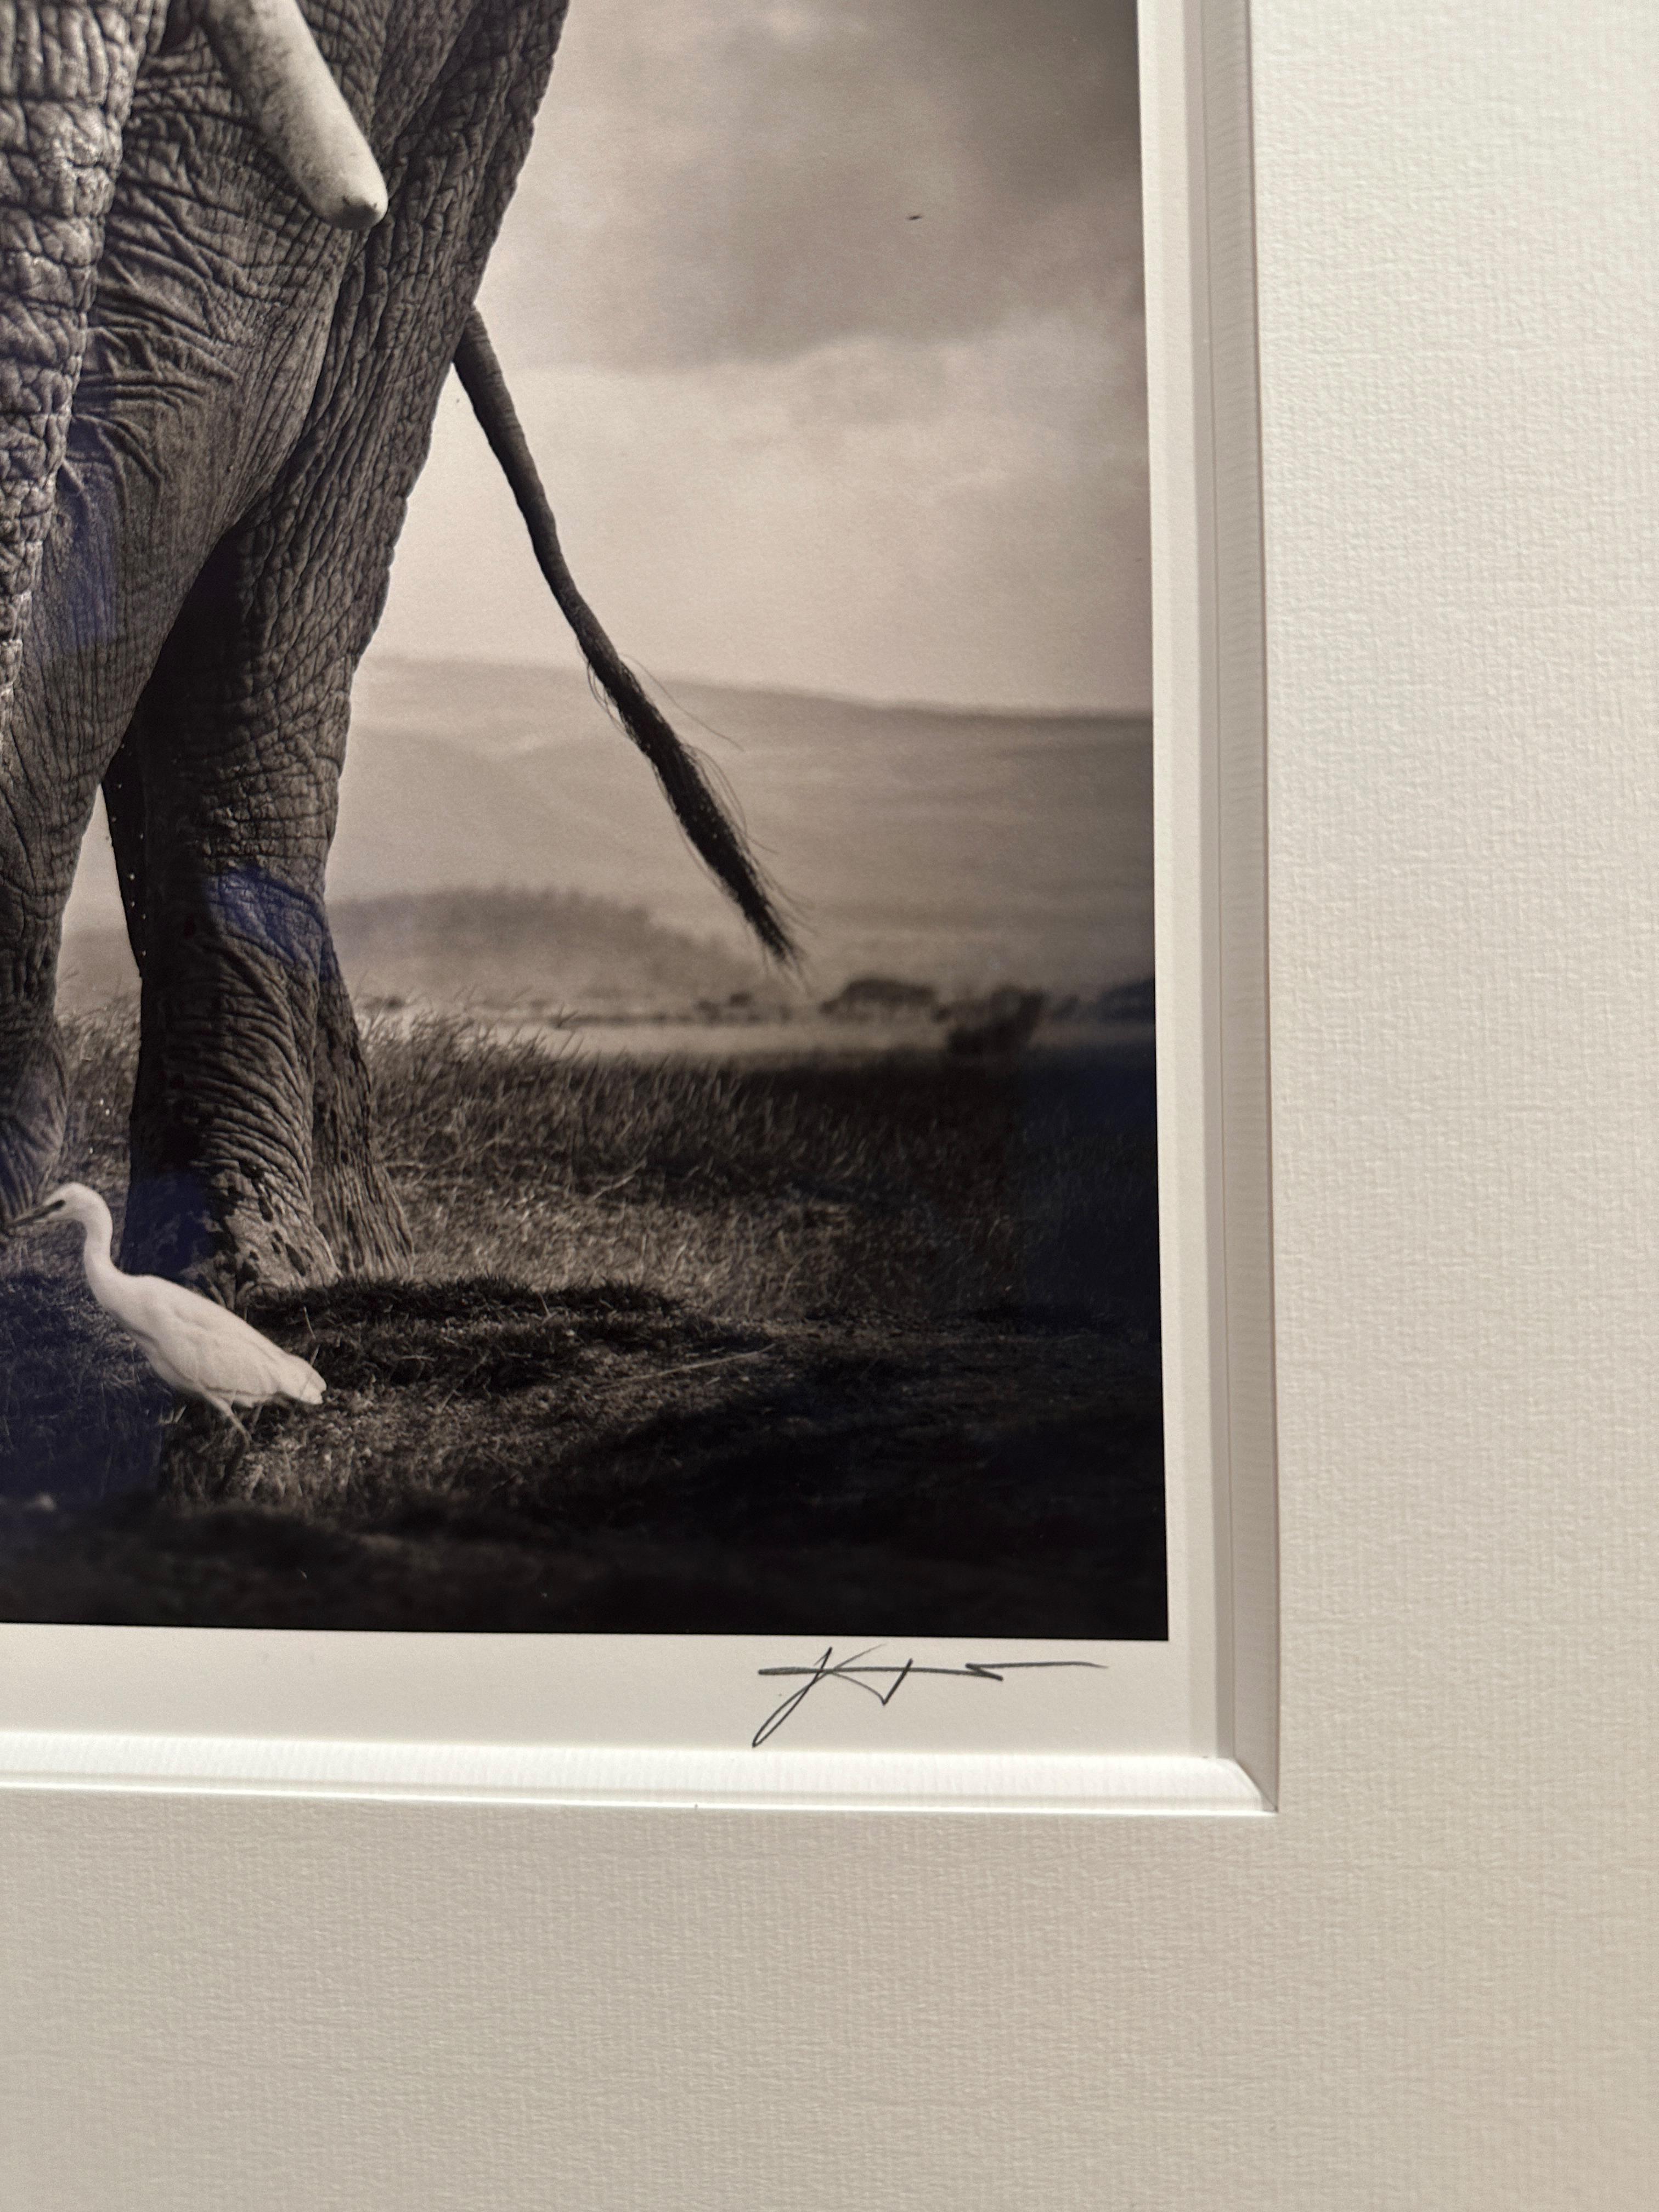 Edition No. 3/12
image size 28,5 x 37,5 cm
signed and numbered
Framed with mat and anti-reflex glass

This majestic elephant bull with an egret.

Joachim Schmeisser is represented by leading Galleries worldwide. His photographs are among the most